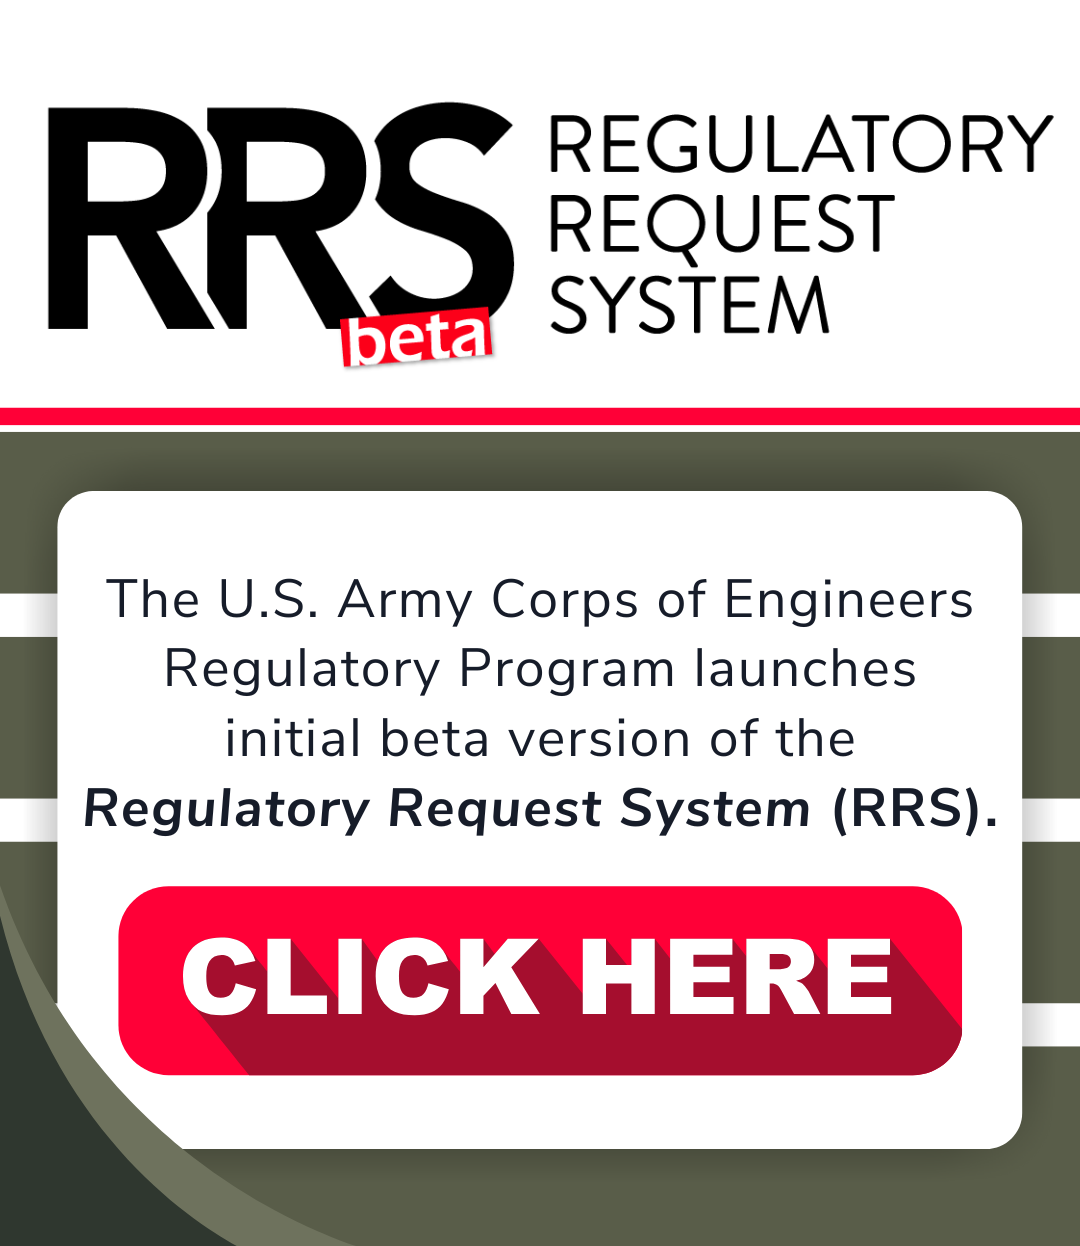 The U.S. Army Corpsof Engineers Regulatory Program launches initial beta version of the Regulatory Request System (RRS)